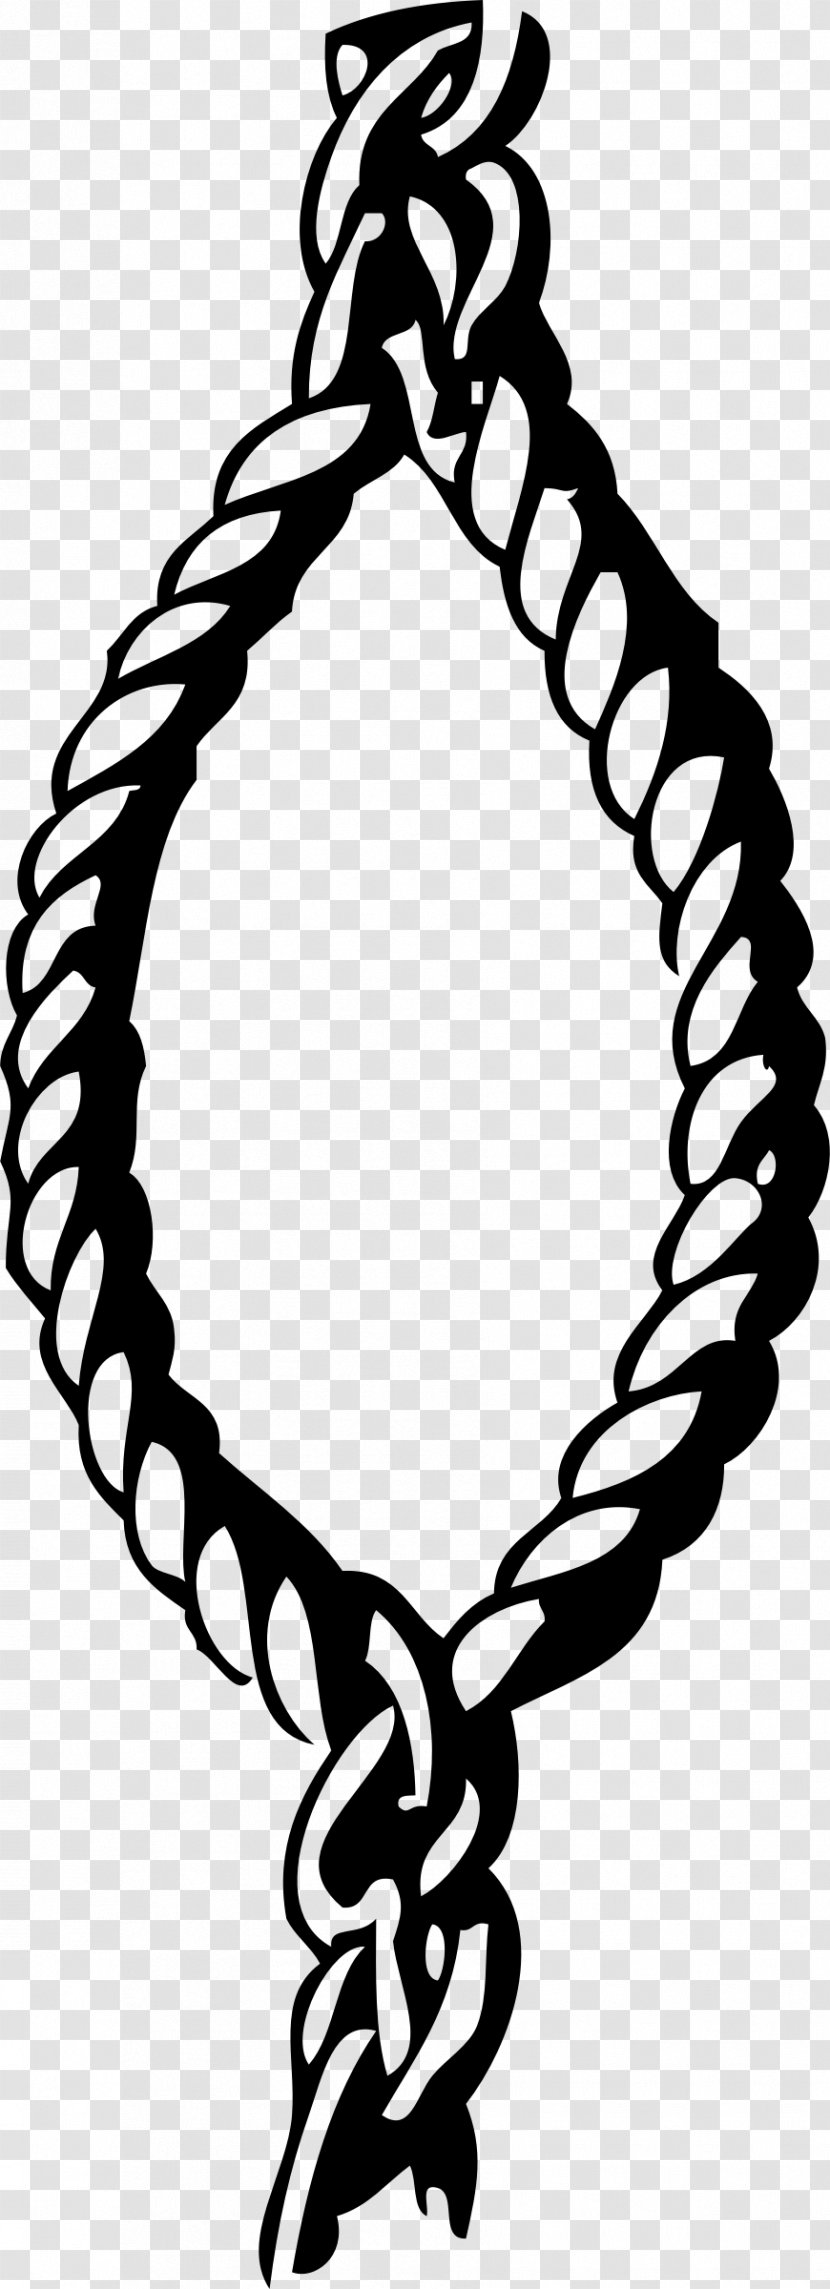 Knot Bowline On A Bight Seizing - Monochrome - Rope Transparent PNG